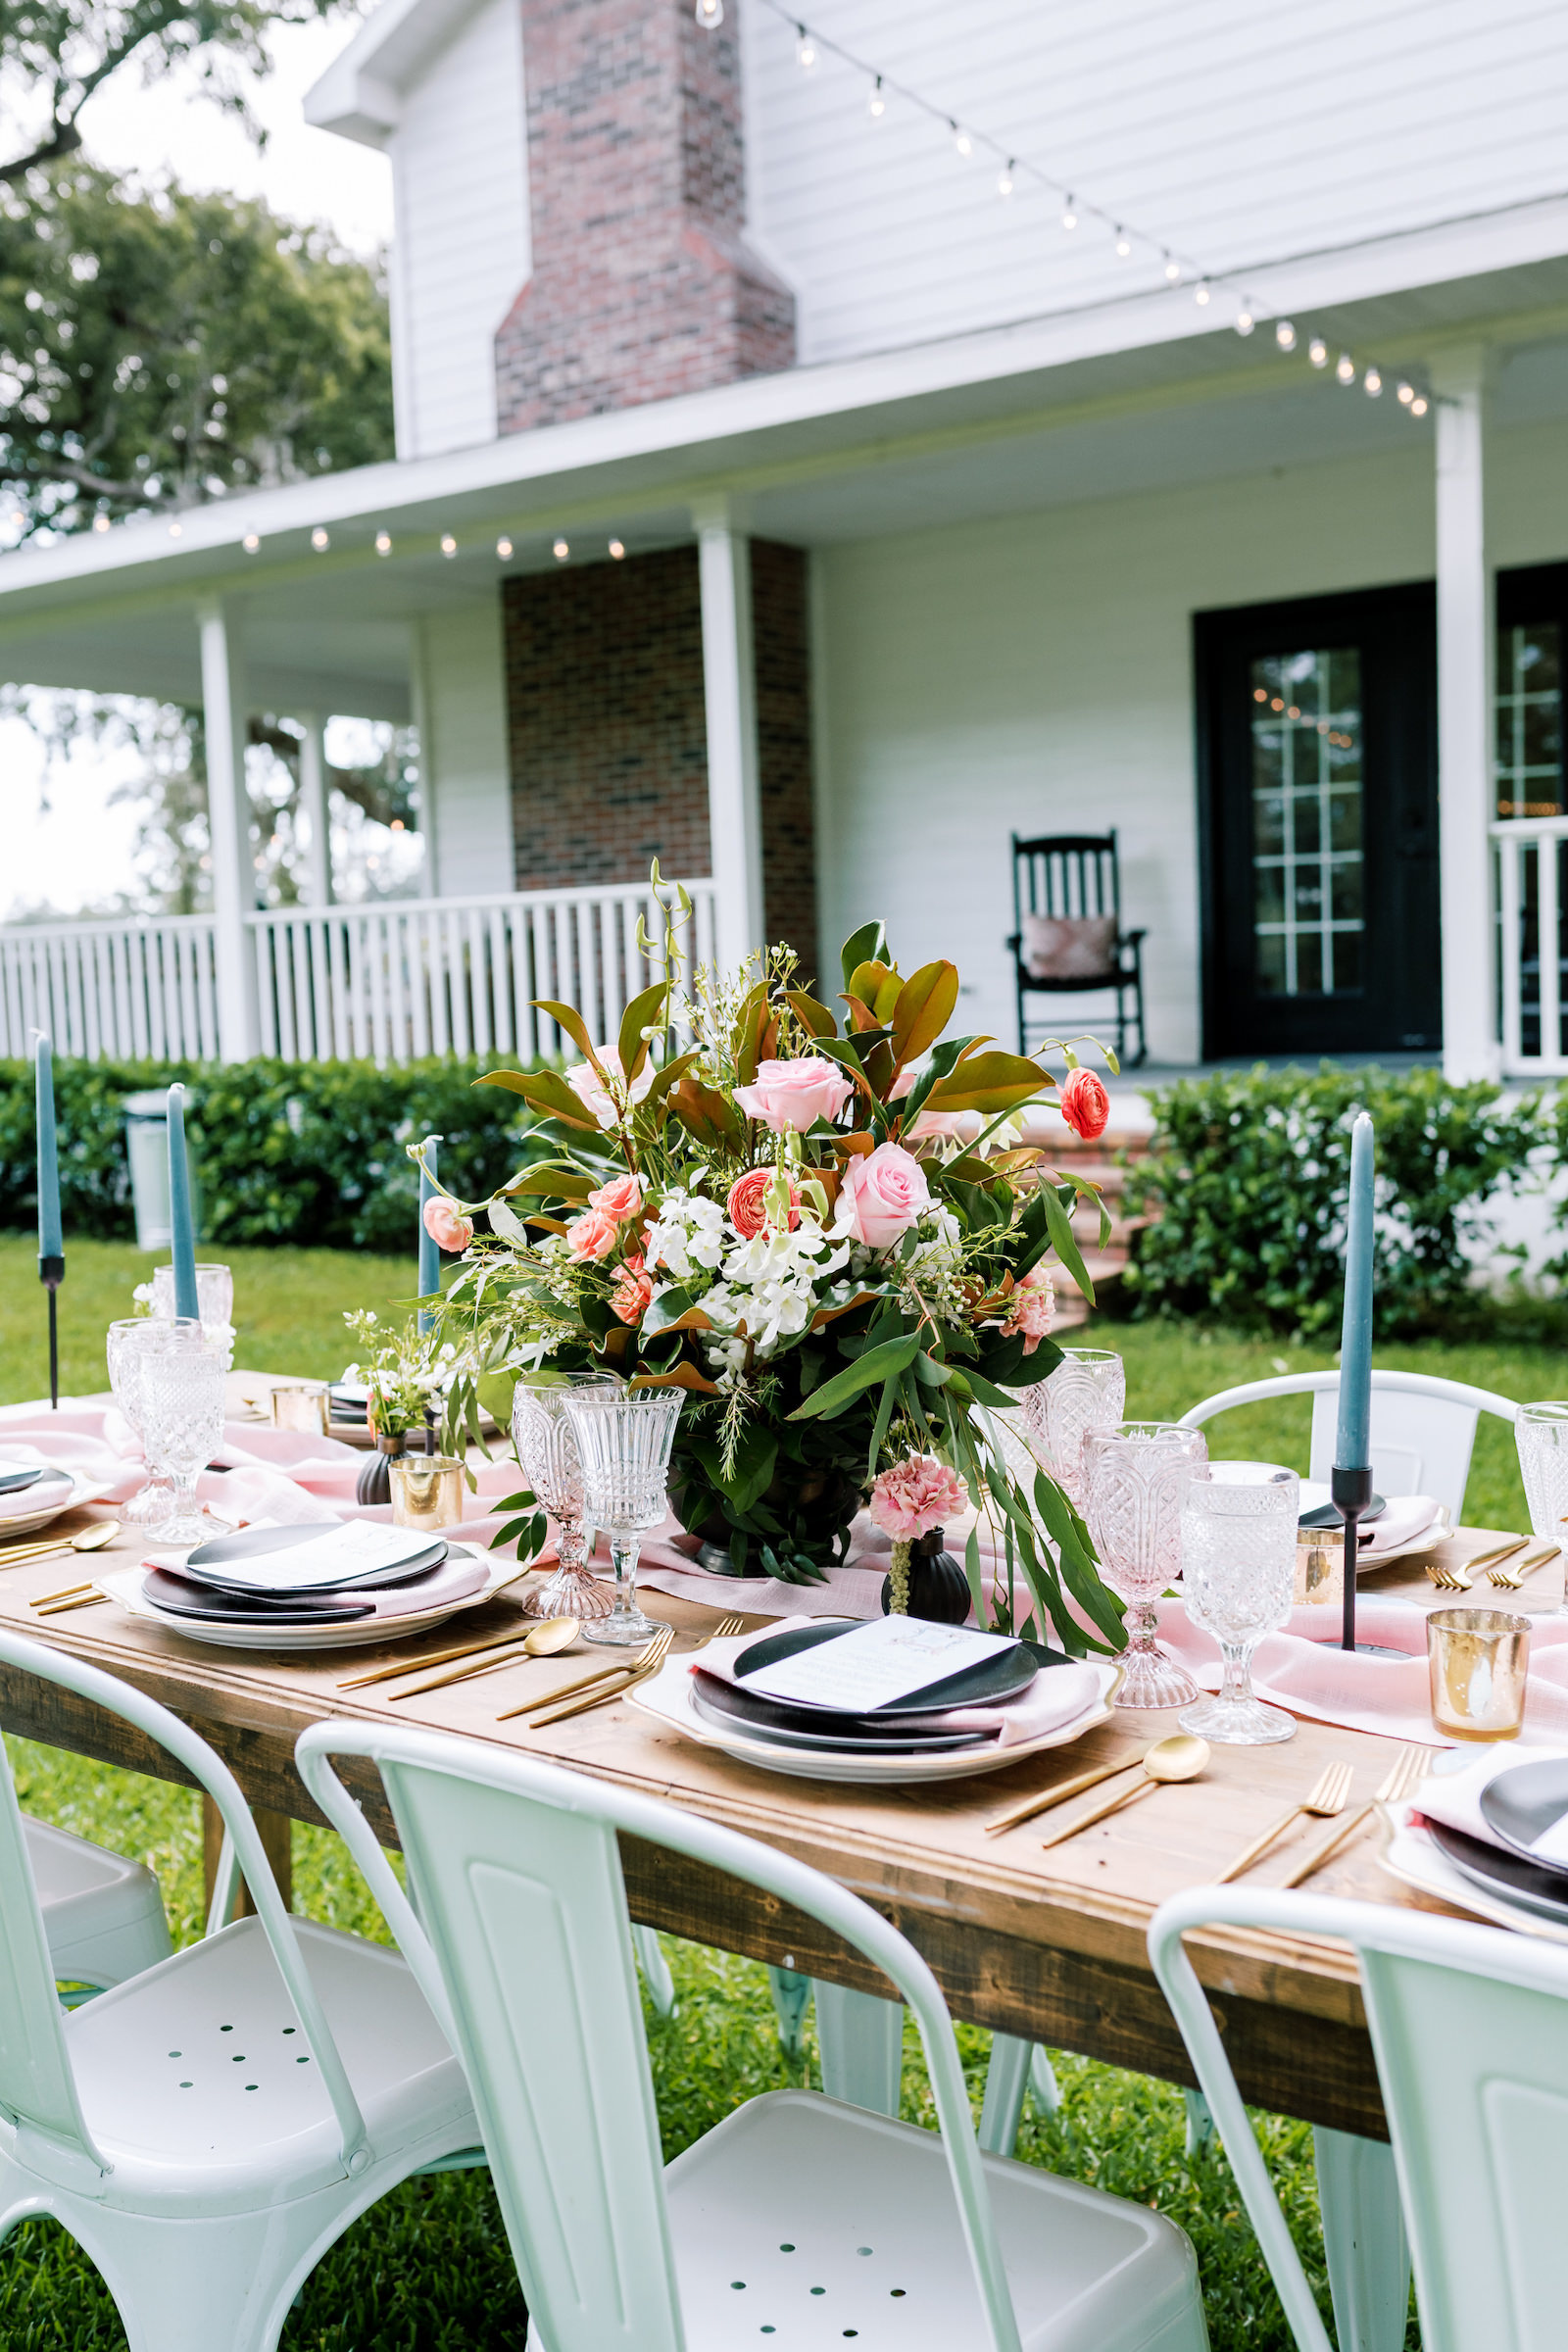 Southern Elegant Inspired Florida Outdoor Wedding Reception, Long Wooden Feasting Table with Dark Blue Place Setting, Gold Flatware, Pink Burlap Linens, Tall Blue Candelabras, Low Floral Centerpiece with Pink Roses, Orange Florals, and Magnolia Leaf Greenery | Tampa Bay Wedding Planner EventFull Weddings